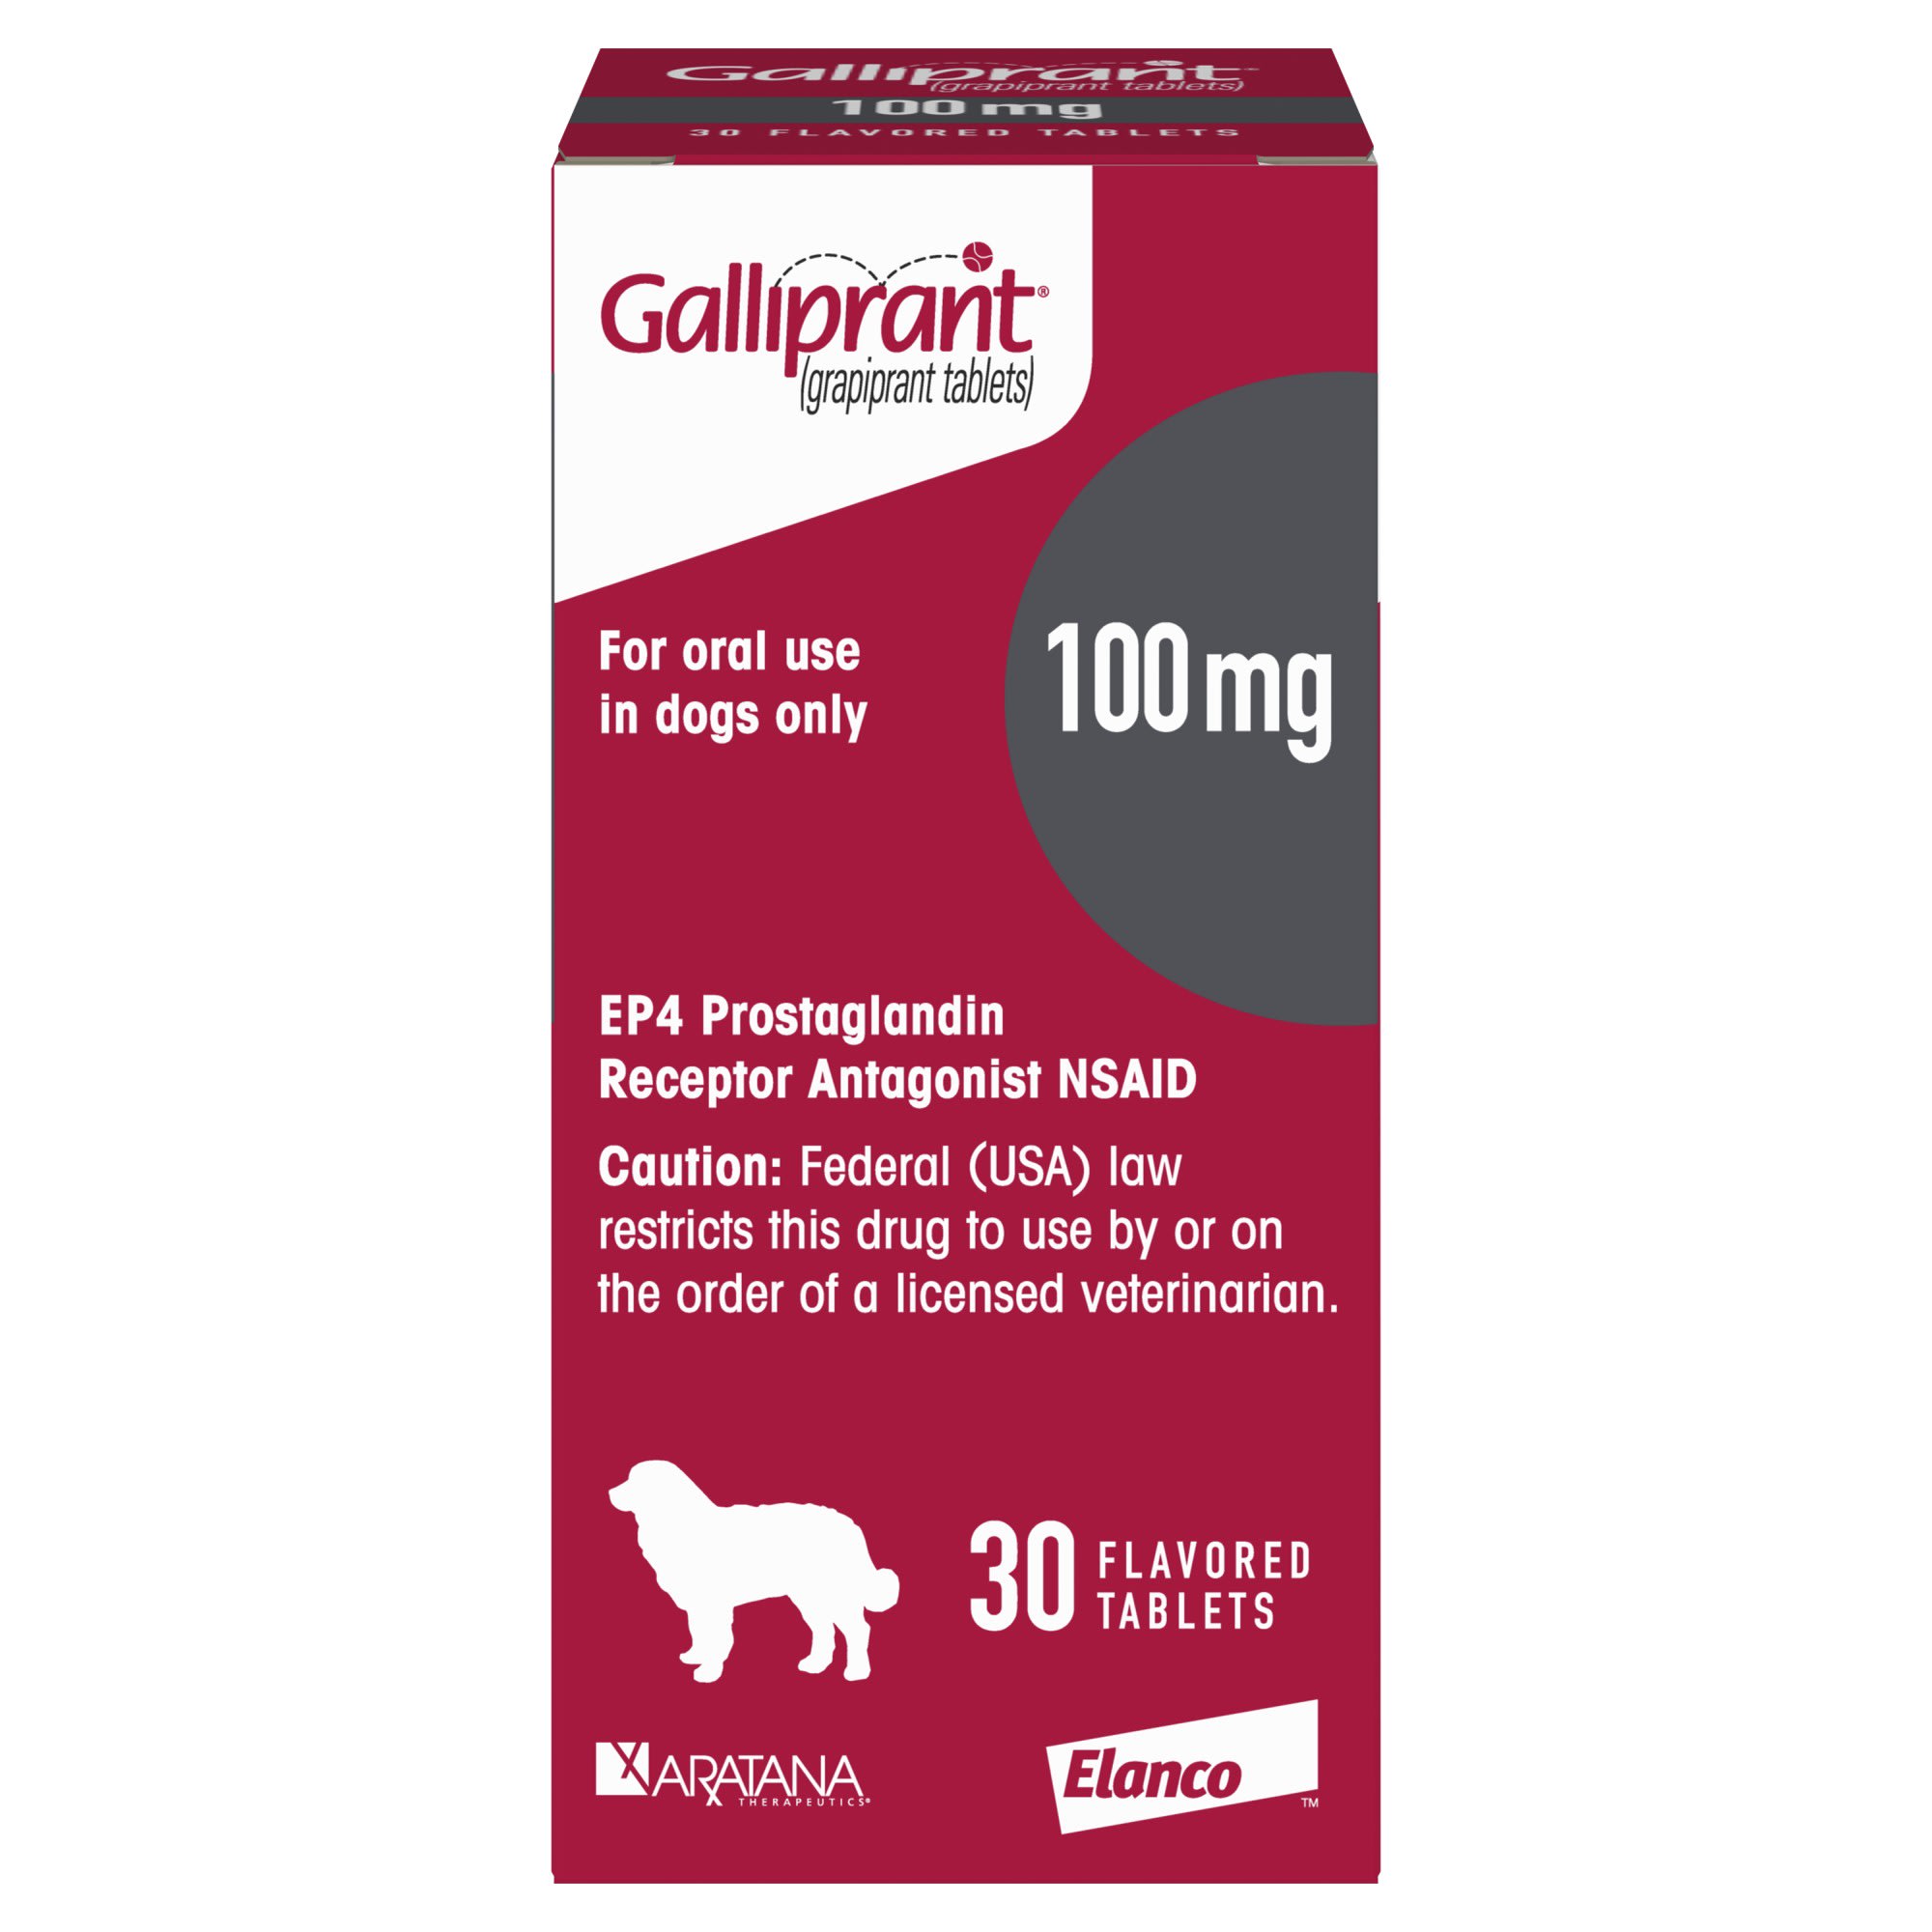 Galliprant 100 mg for Dogs, 30 Tablets, 30 CT